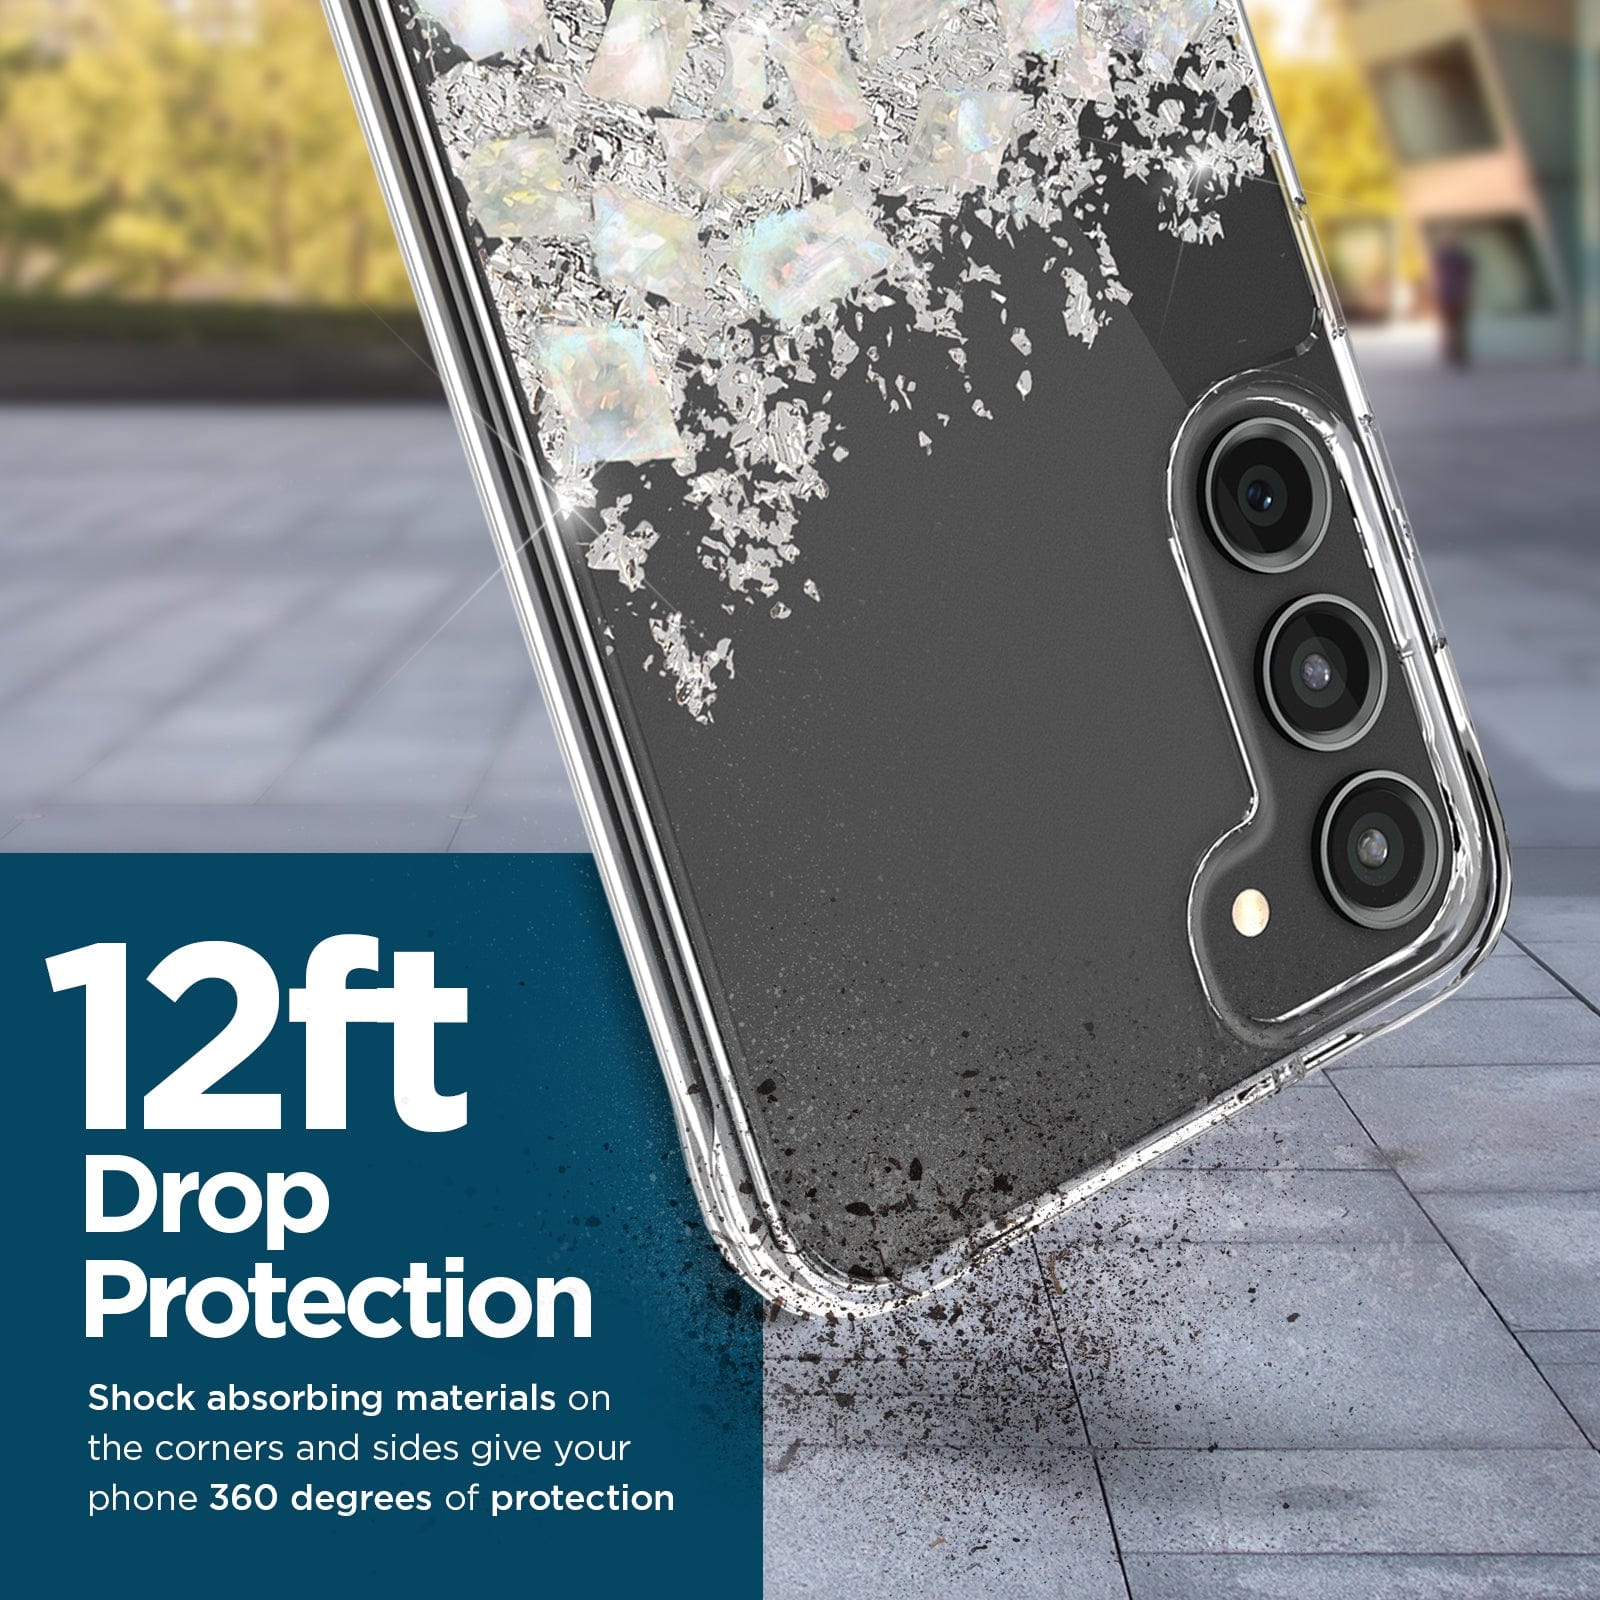 12ft DROP PROTECTION. SHOCK ABSORBING MATERIALS ON THE CORNERS AND SIDES GIVE YOUR PHONE 360 DEGREES OF PROTECTION.